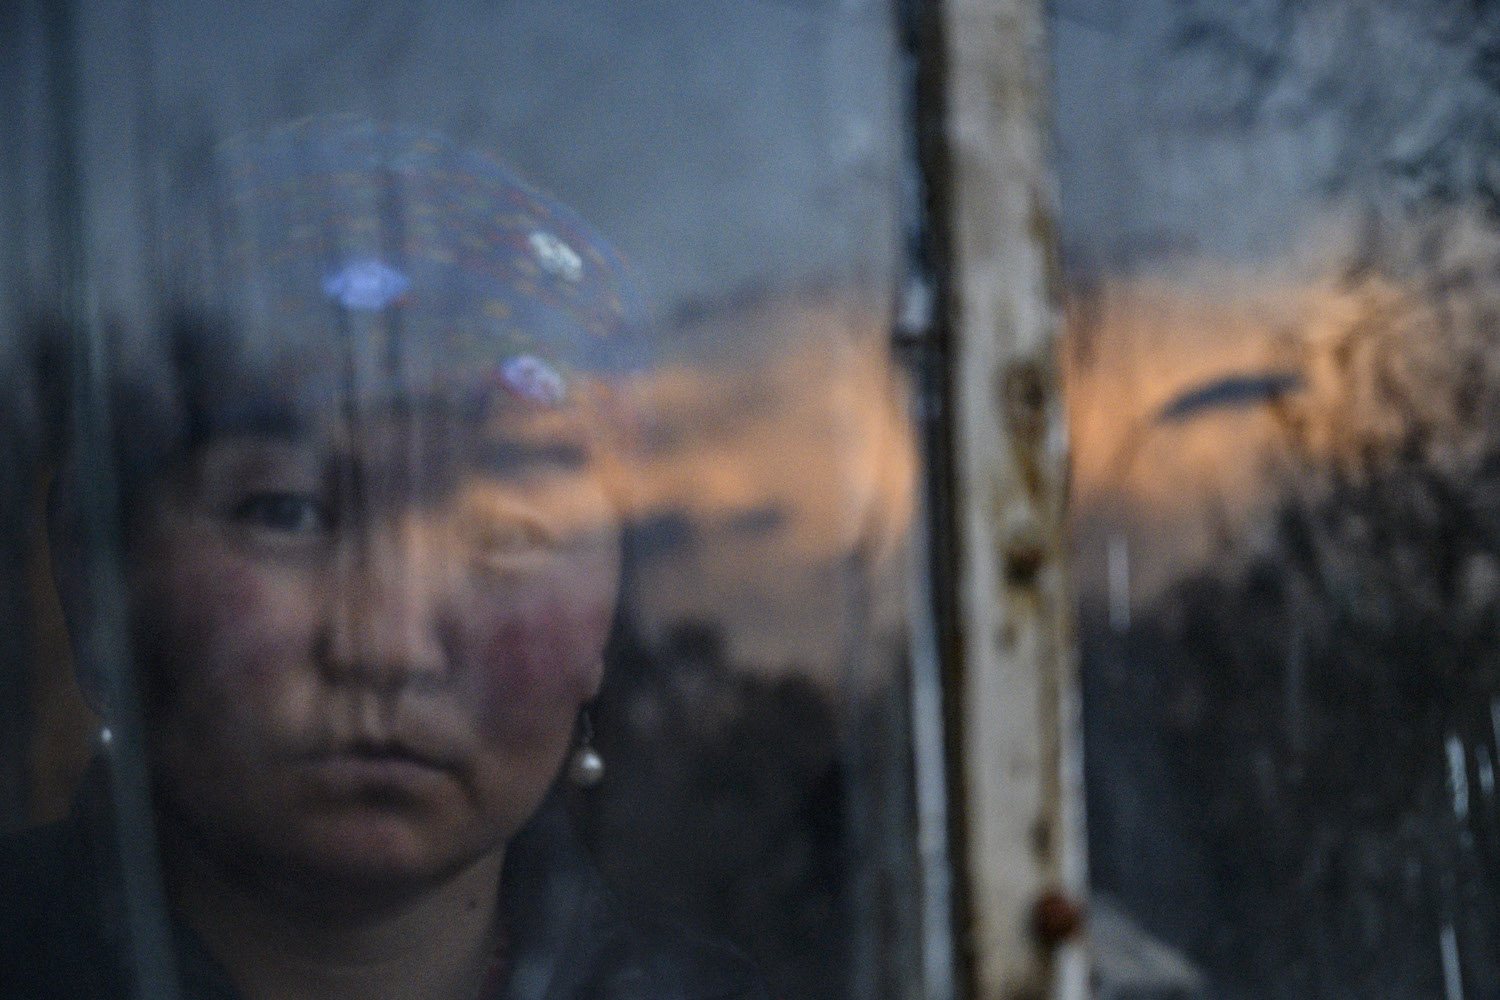 ©Yuri Kozyrev / NOOR Caption: Kazakhstan  April 2019    Kazakhstan, Almaty, April 2019, Gulzira Auelhan, an ethnic Kazakh, returned to China’s far western Xinjiang in 2017 to visit her ailing father. Instead, she was detained for 437 days in China’s sprawling new system of incarceration and indoctrination. Instead, over the course of 437 days, she was detained in five different facilities, including a factory and a middle school converted into a centre for political indoctrination and technical instruction, with several interludes of a form of house arrest with relatives. The Chinese government has said it offers free vocational education and skills training to people such as Ms. Auelhan. But over more than 14 months, “that training lasted one week,” she said, not including the time she spent forced to work in a factory. IG : @noorimages Twitter : @noorimages